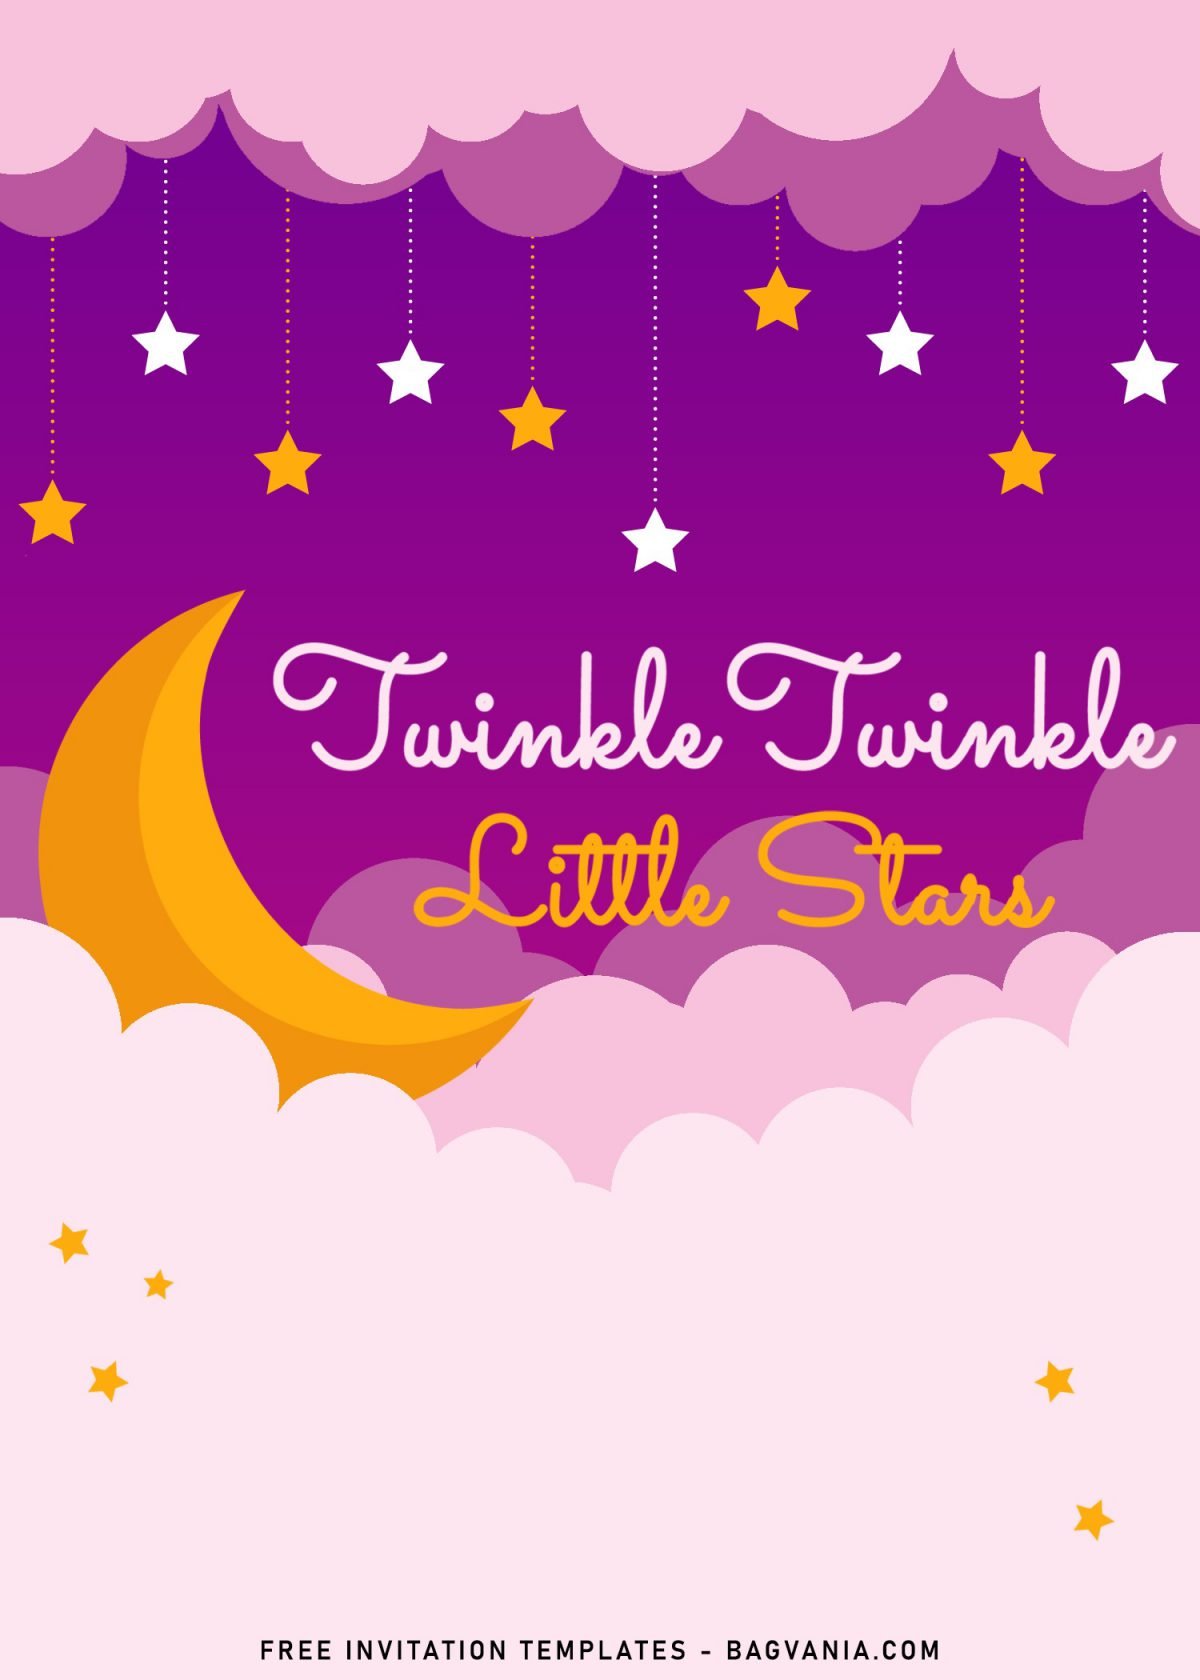 10+ Twinkle Twinkle Little Star Birthday Invitation Templates and has pristine white clouds